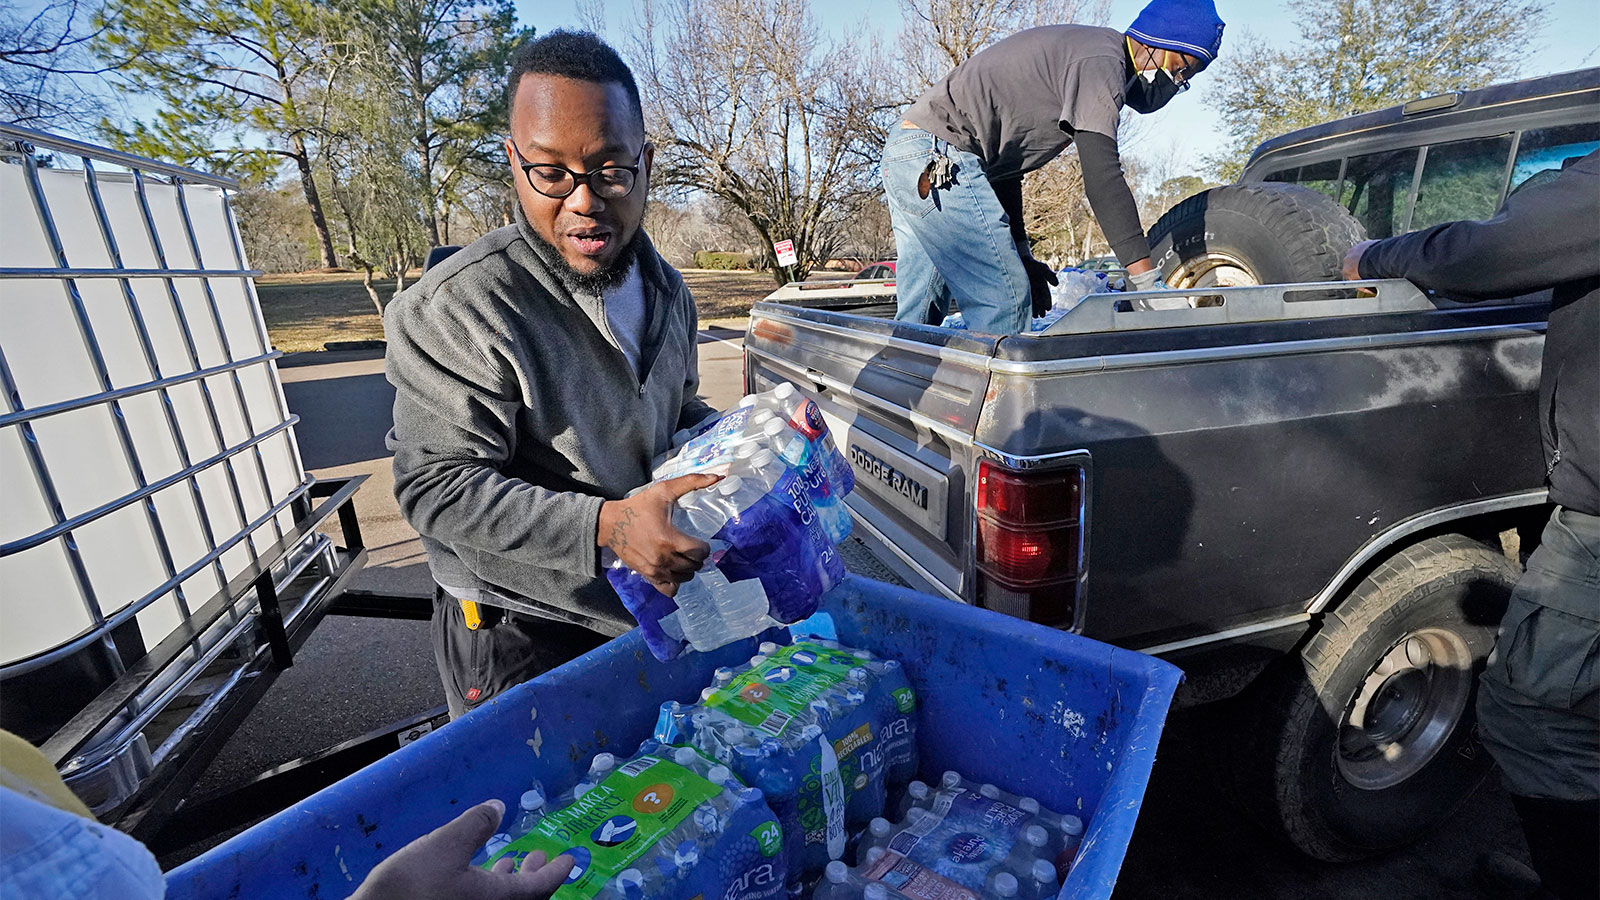 Madonna Manor maintenance supervisor Lamar Jackson left, stacks bottled water brought by Mac Epps of Mississippi Move, as part of the supply efforts by city councilman and State Rep. De'Keither Stamps to a senior residence in west Jackson, Miss.